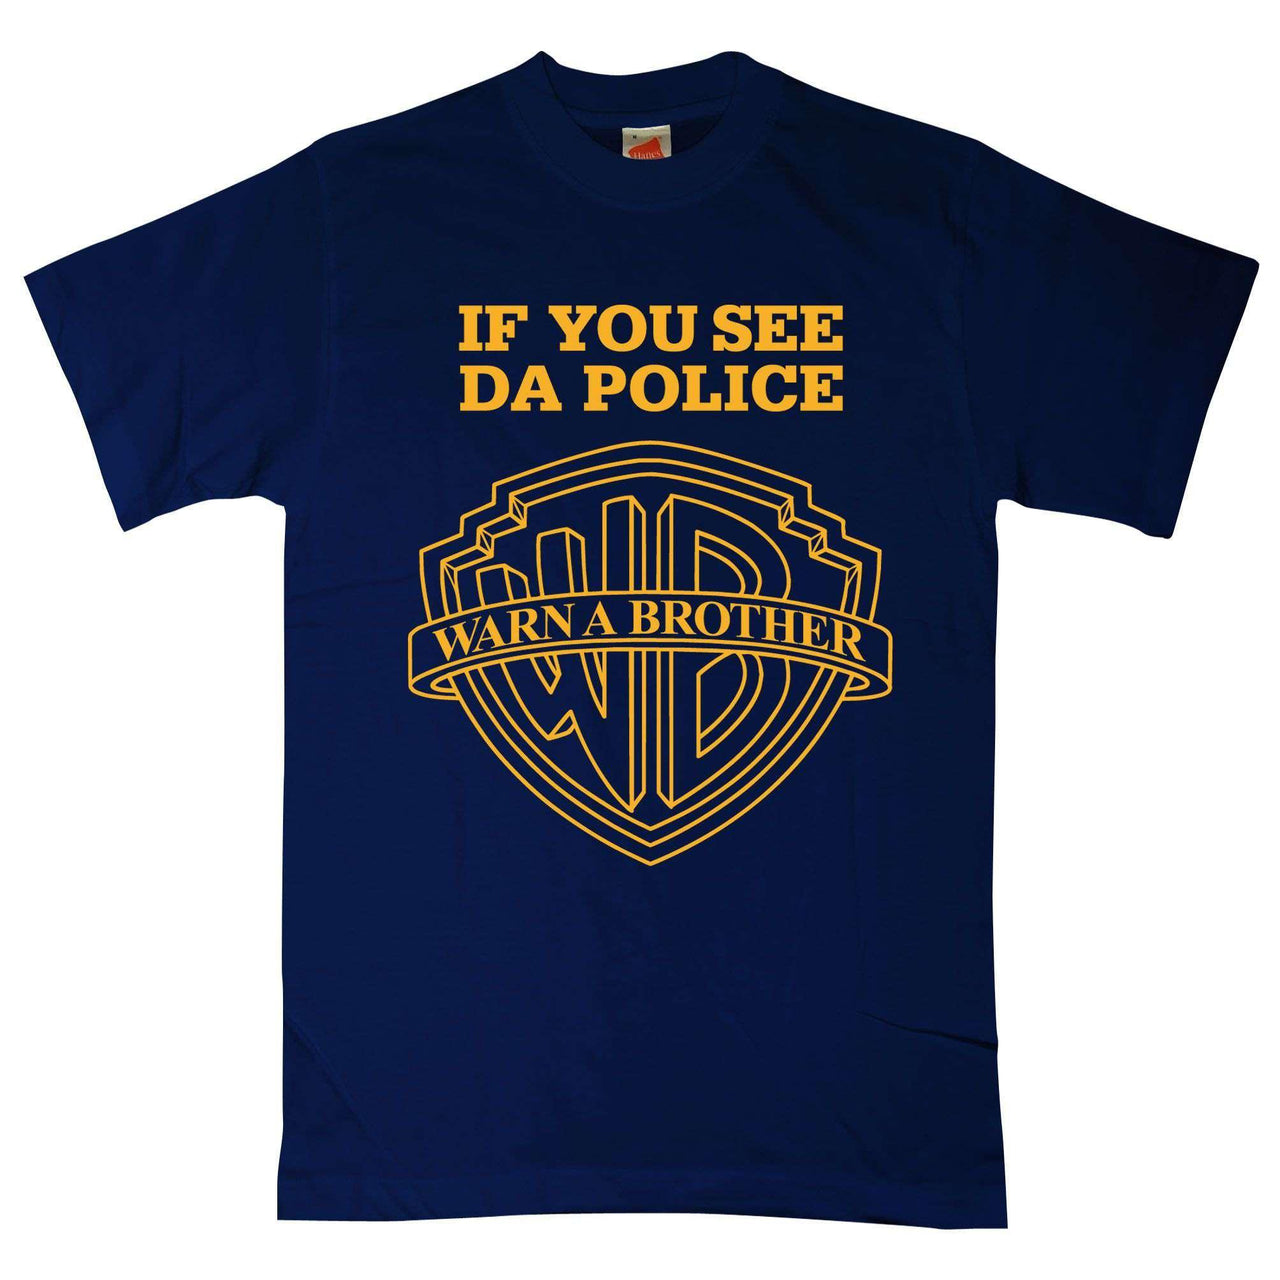 If You See Da Police Warn A Brother Unisex T-Shirt For Men And Women 8Ball